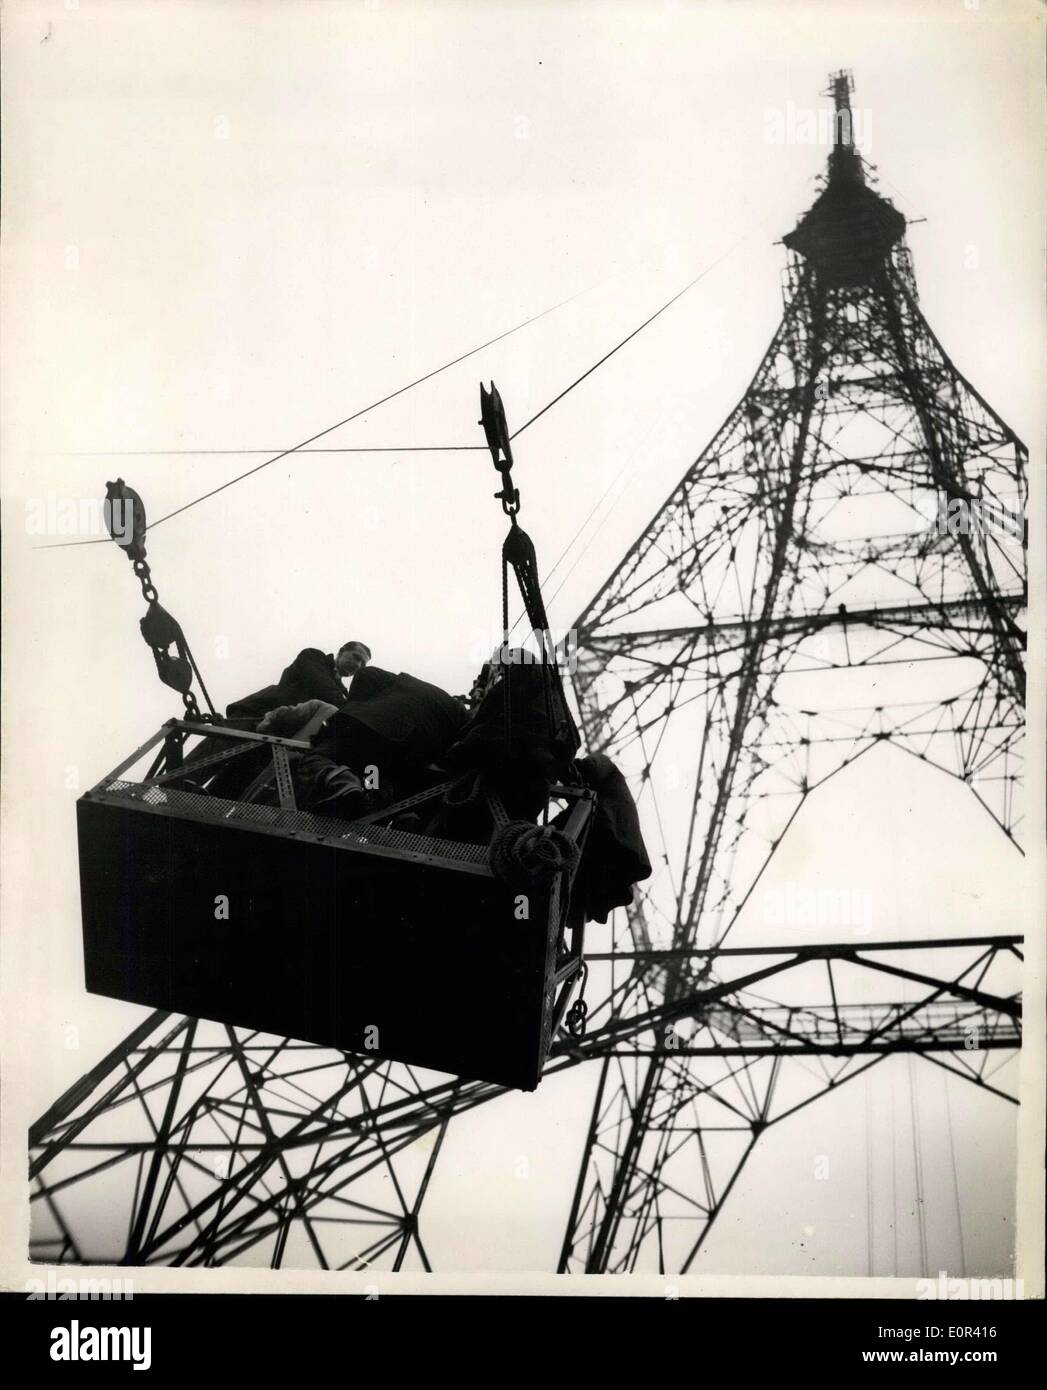 Nov. 20, 1957 - Testing the new B.B.C television mast with the aid of rockets at crystal palace: The new B.B.C Television Mast which is 709 ft. high underwent an aerodynamic test today when a battery of ten rockets mounted on the tower at a height of 625 ft. above ground level and fired in sequence. The rockets were a fixture and when fired each one created a thrust of half a ton. Any movement of the tower being recorded on electronic equipment in a mobile laboratory. The tests were conducted in conjunction with the National Physical Laboratory and the Royal Aircraft Establishment Stock Photo